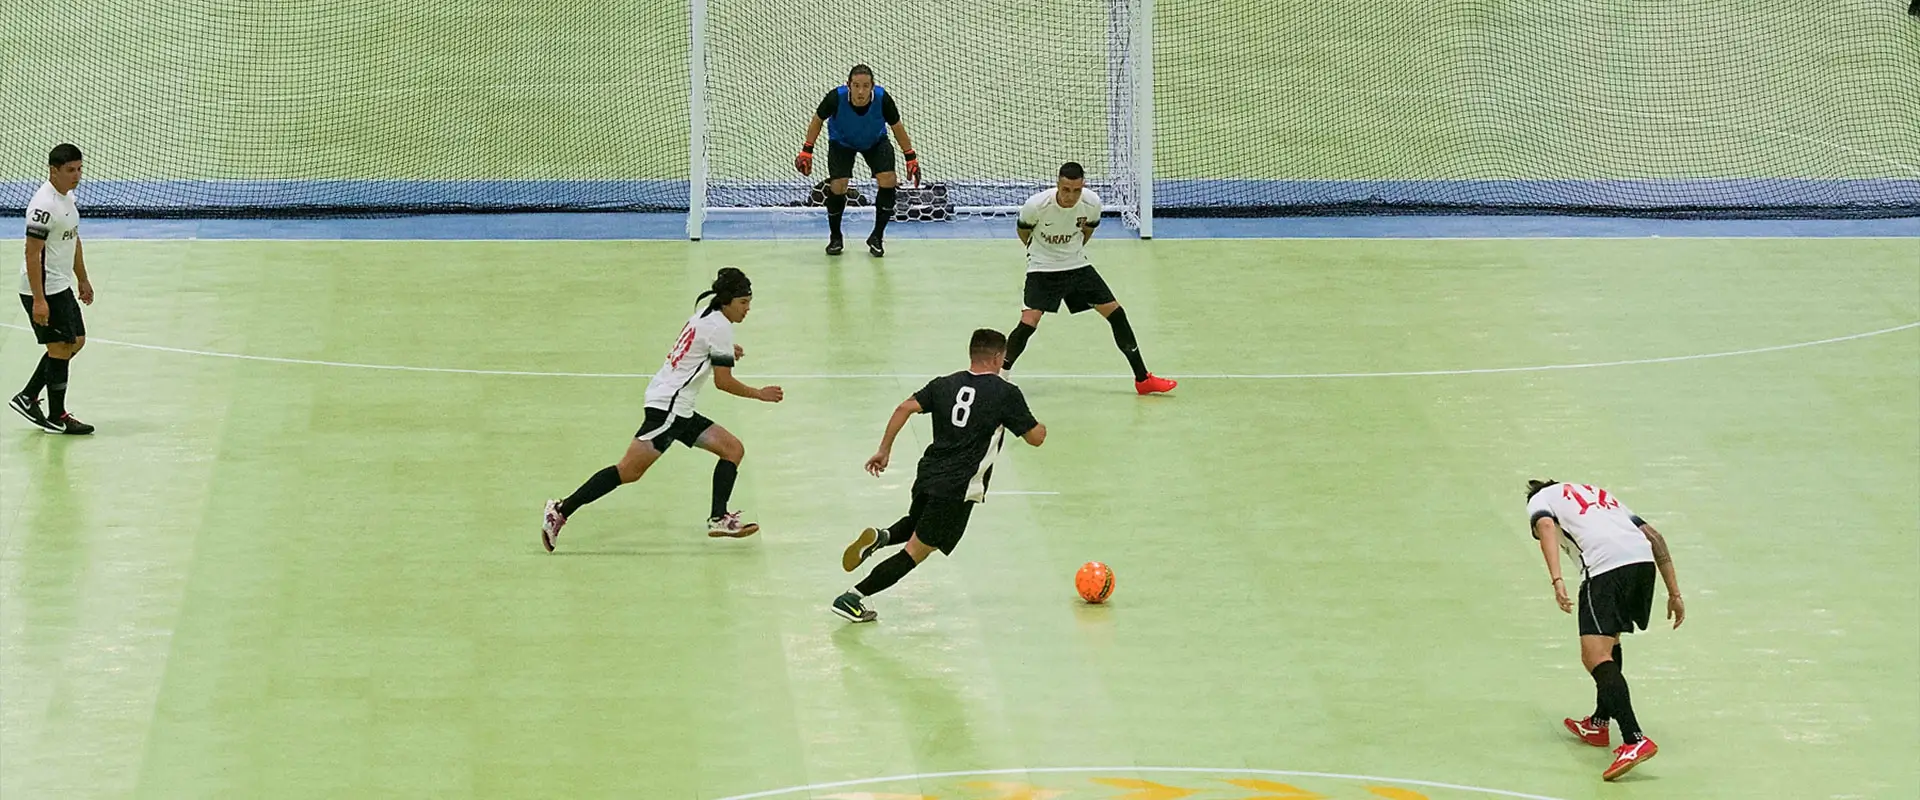 Futsal tournament at the Hawaii convention center